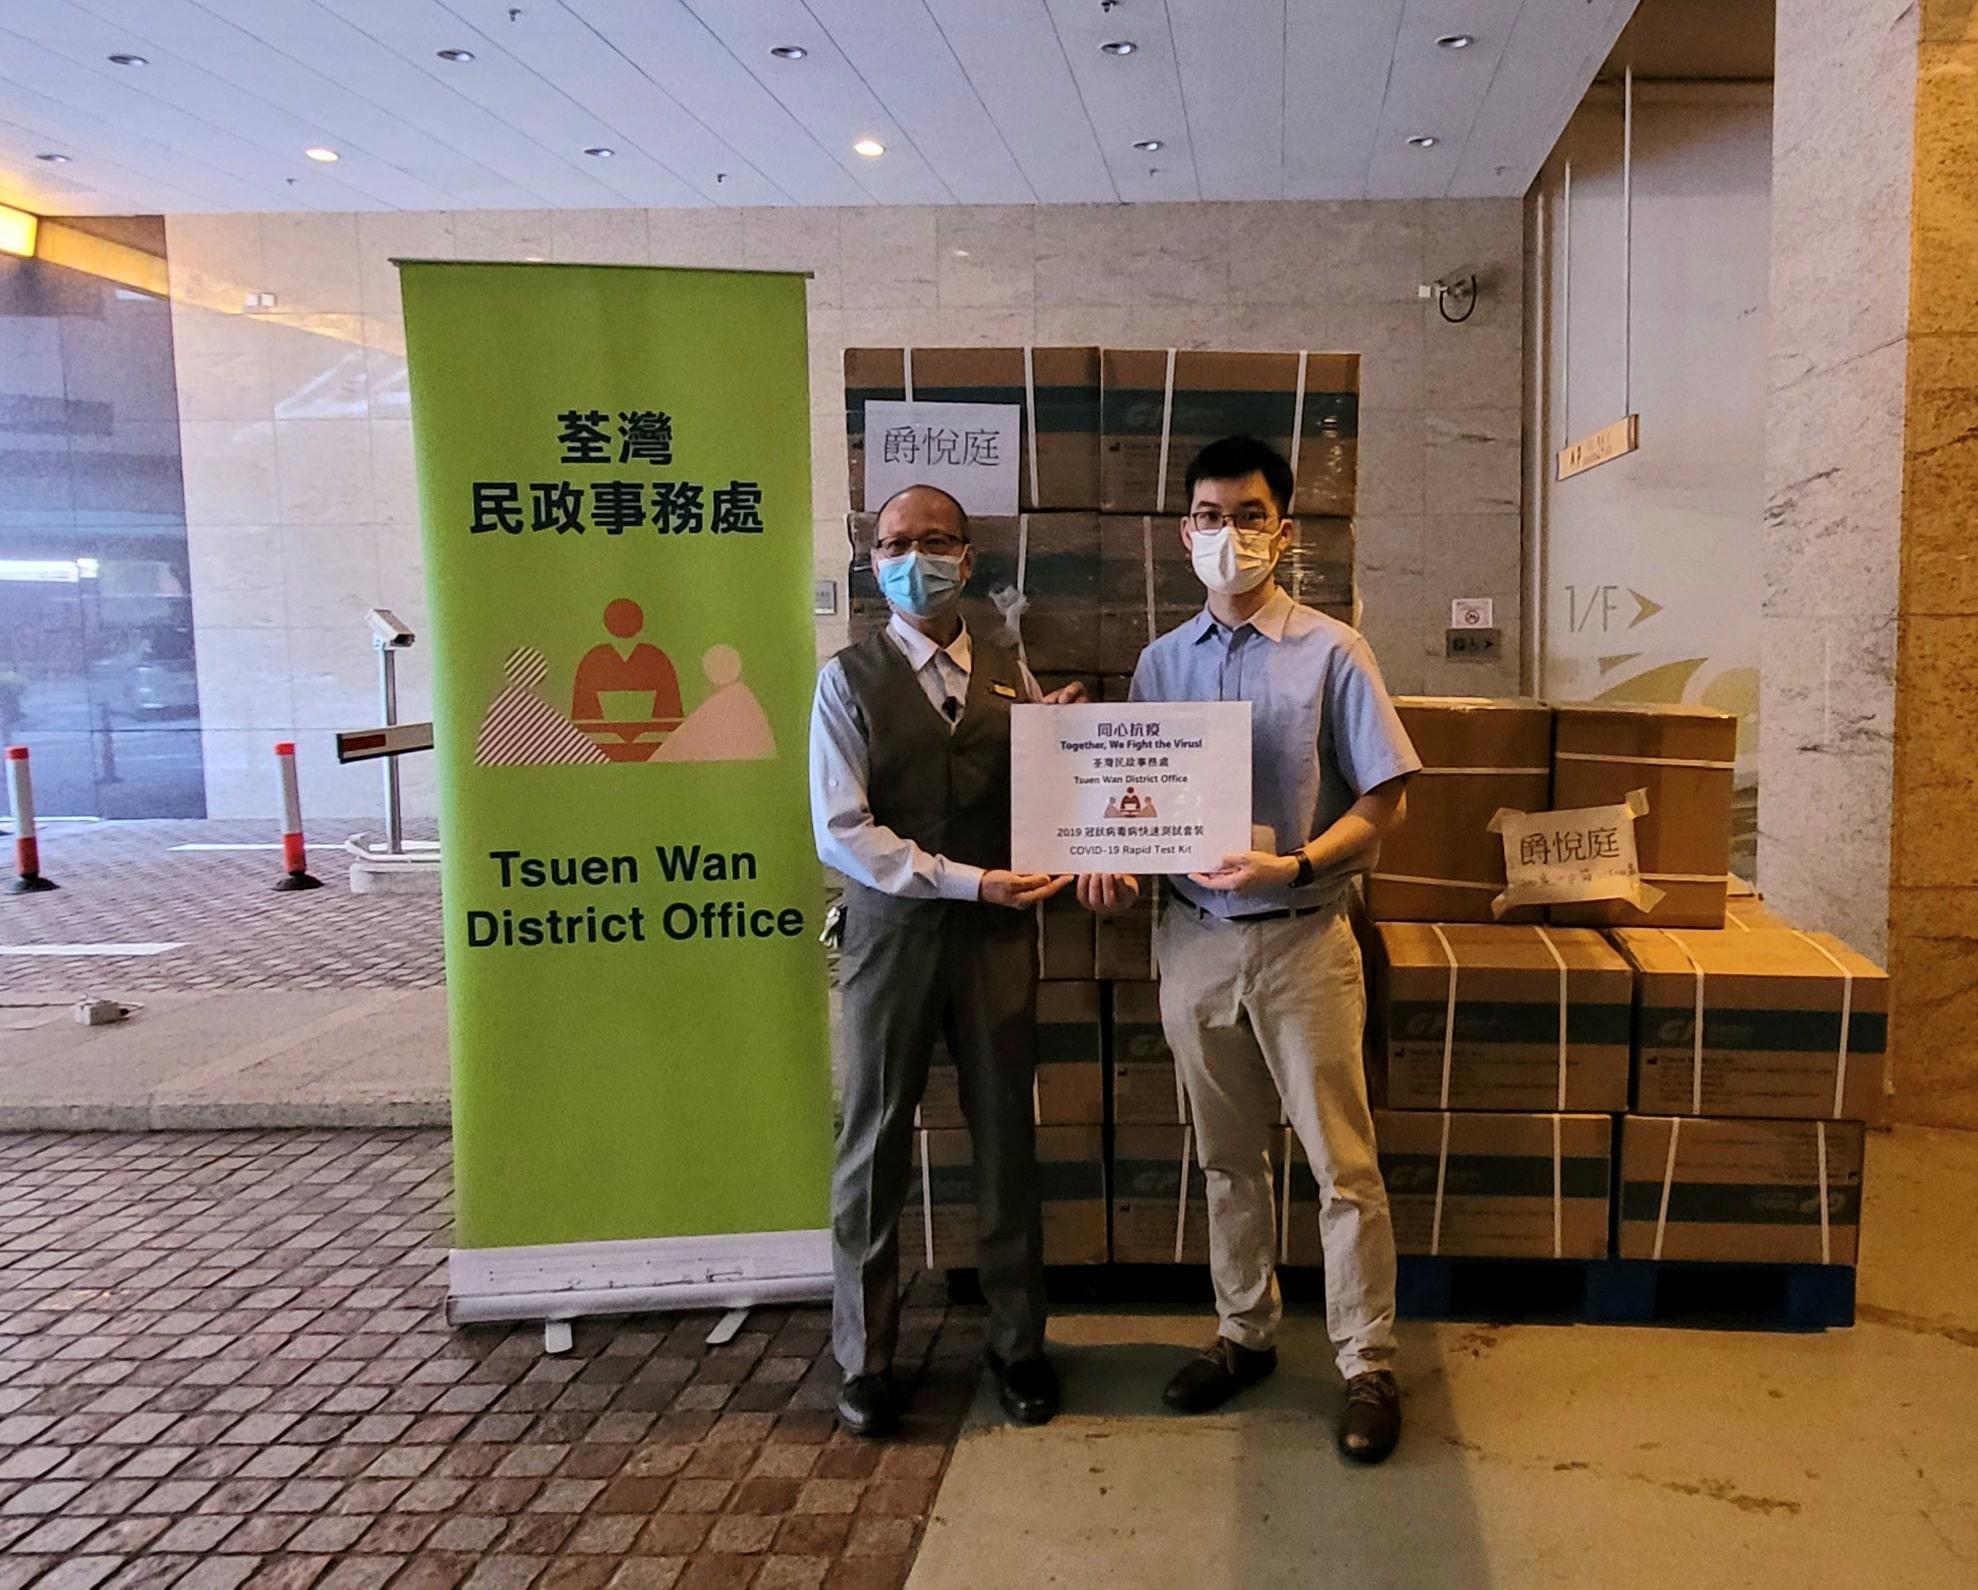 The Tsuen Wan District Office today (July 22) distributed COVID-19 rapid test kits to households, cleansing workers and property management staff living and working in Chelsea Court for voluntary testing through the property management company.

